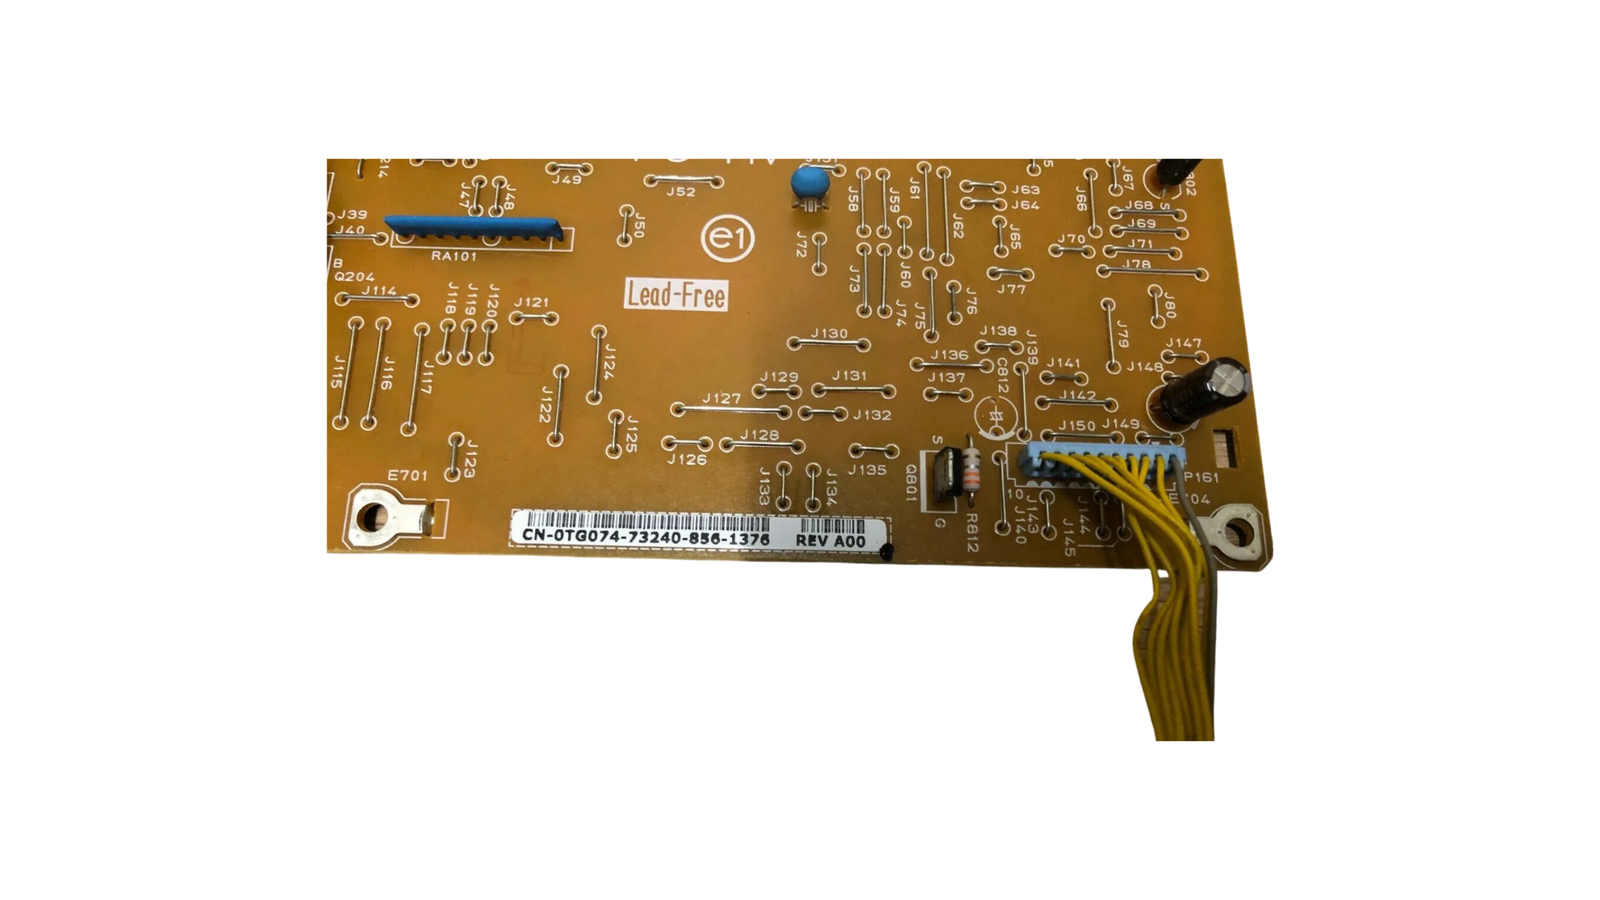 High voltage 0TG074 power supply board for Dell MFP 3115cn printer